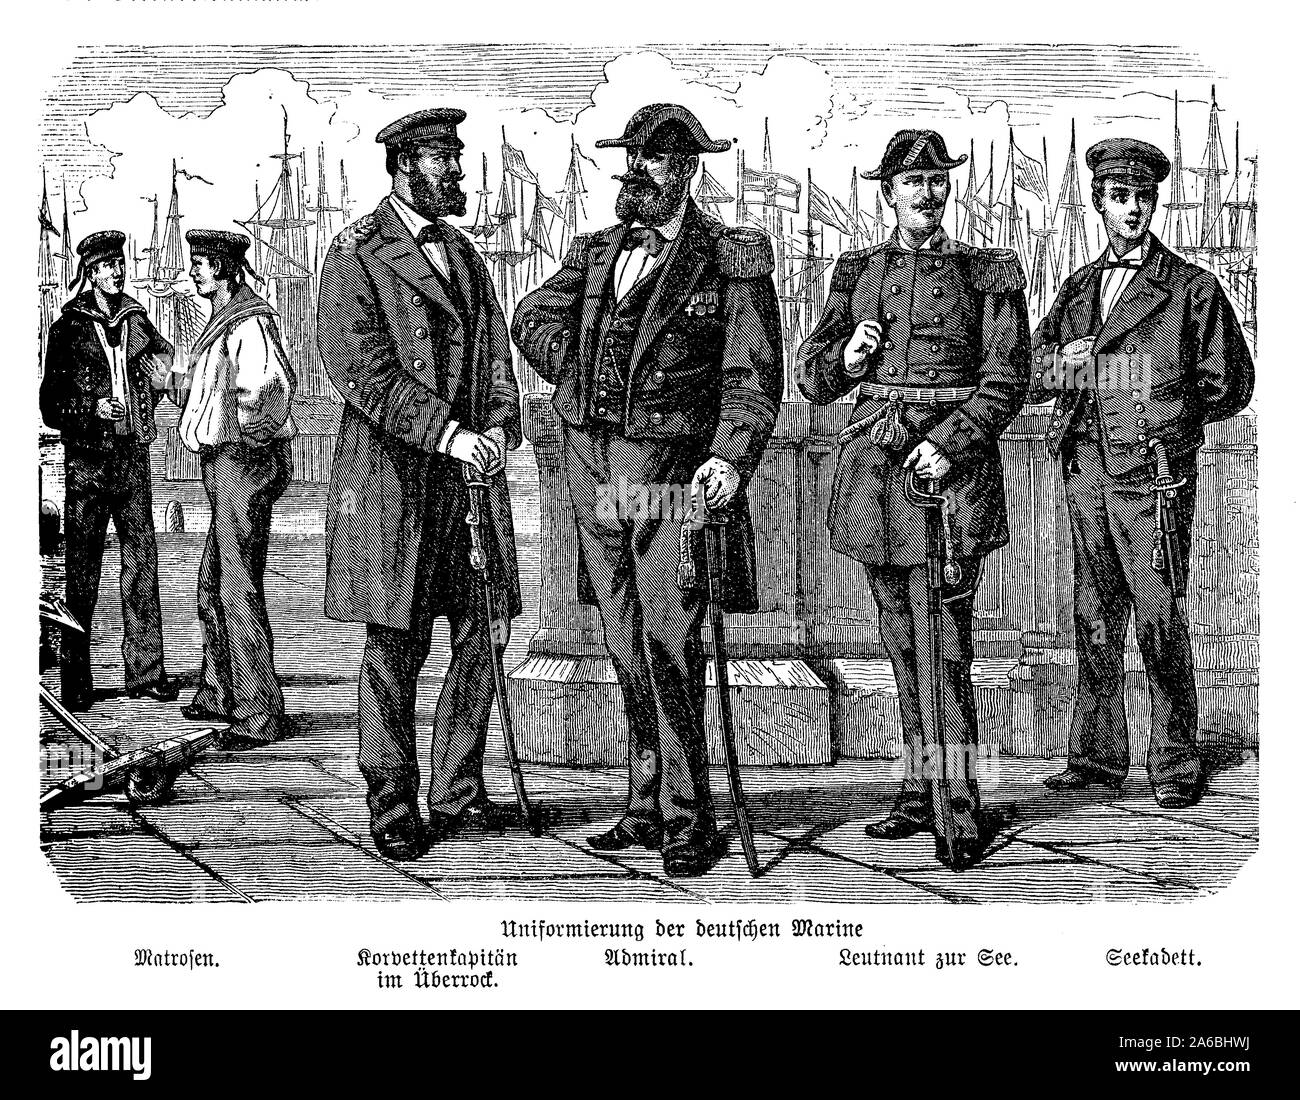 German engraving with the uniforms of the Imperial German Navy seaman and officers in 19th century, from left: sailors, corvette commander with coat, admiral, lieutenant and midshipman Stock Photo